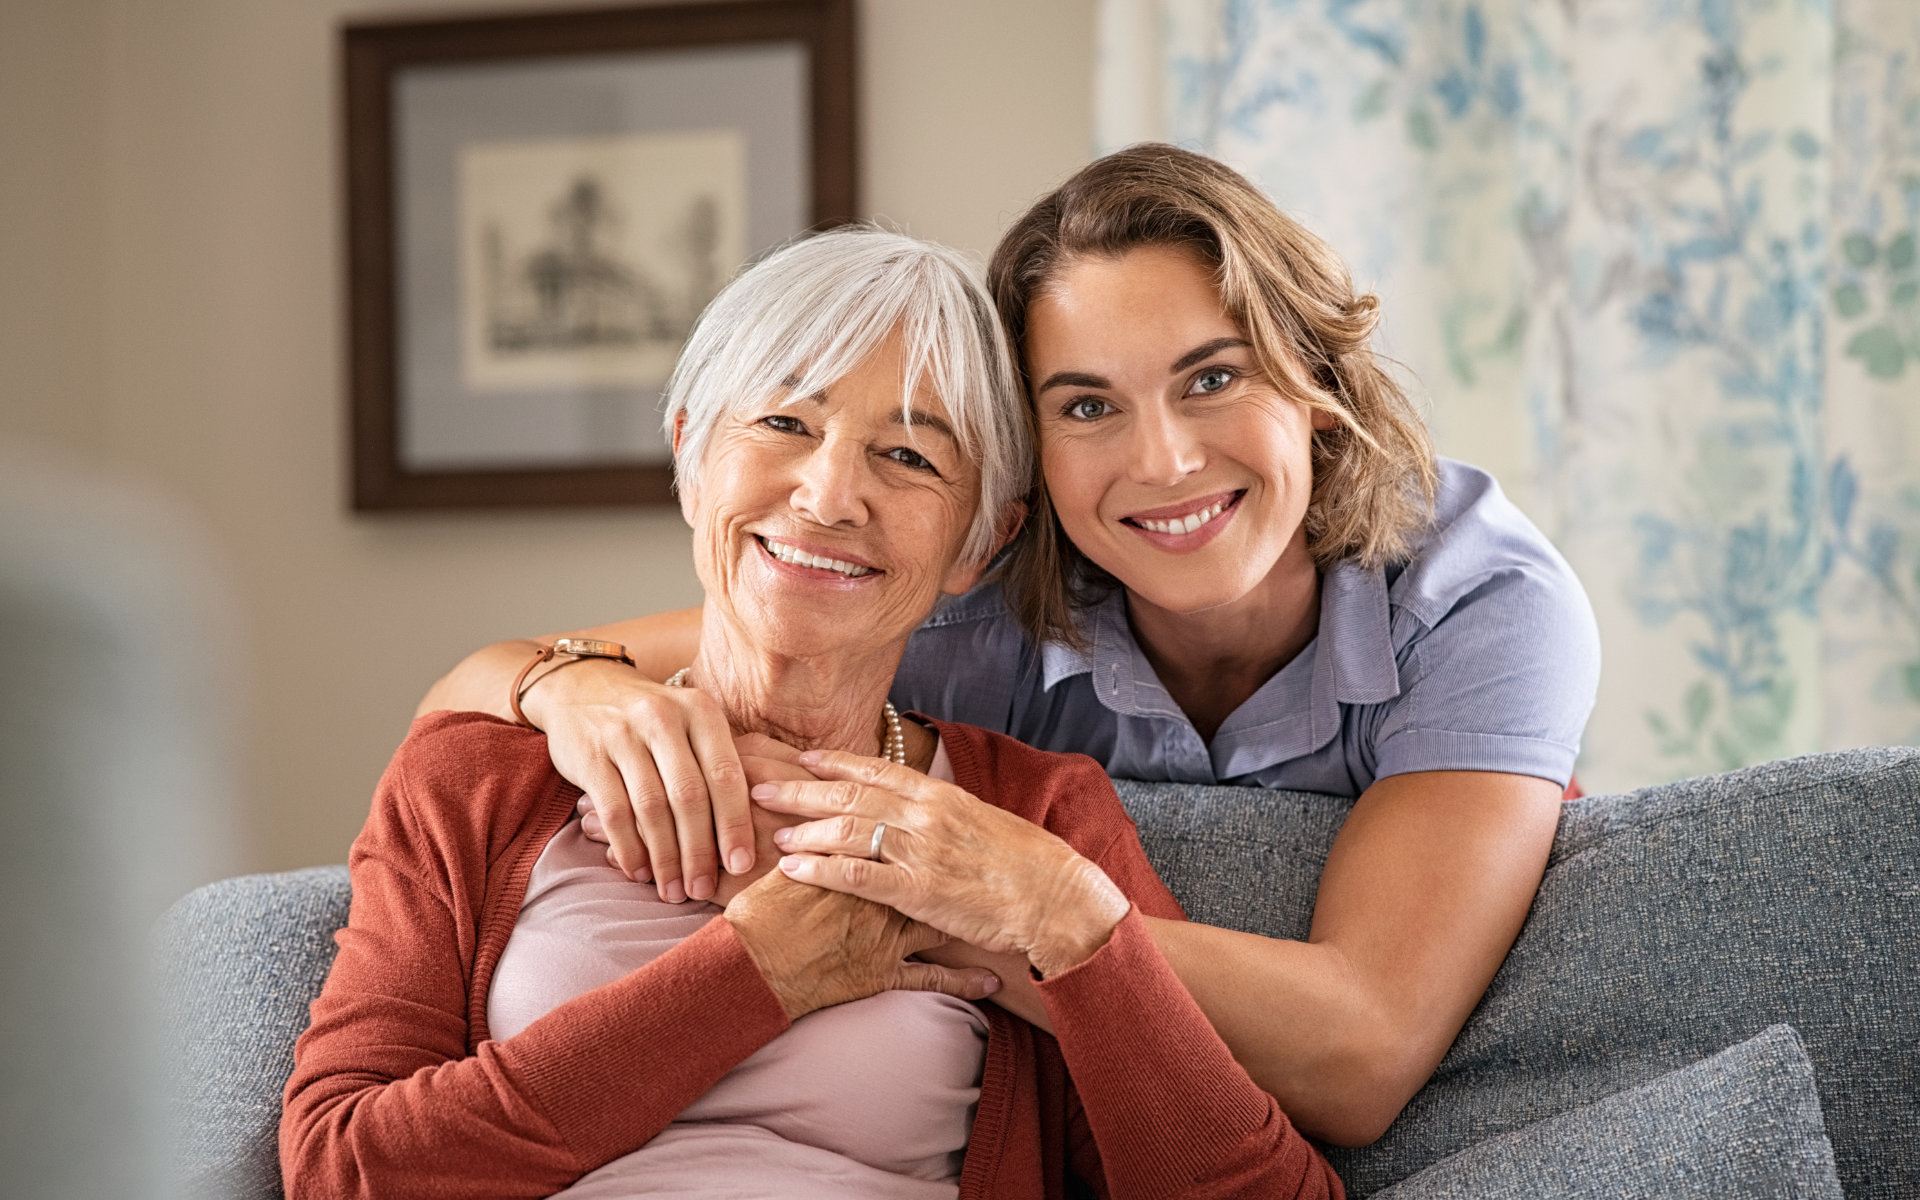 A broadly smiling mature woman embracing her mother.